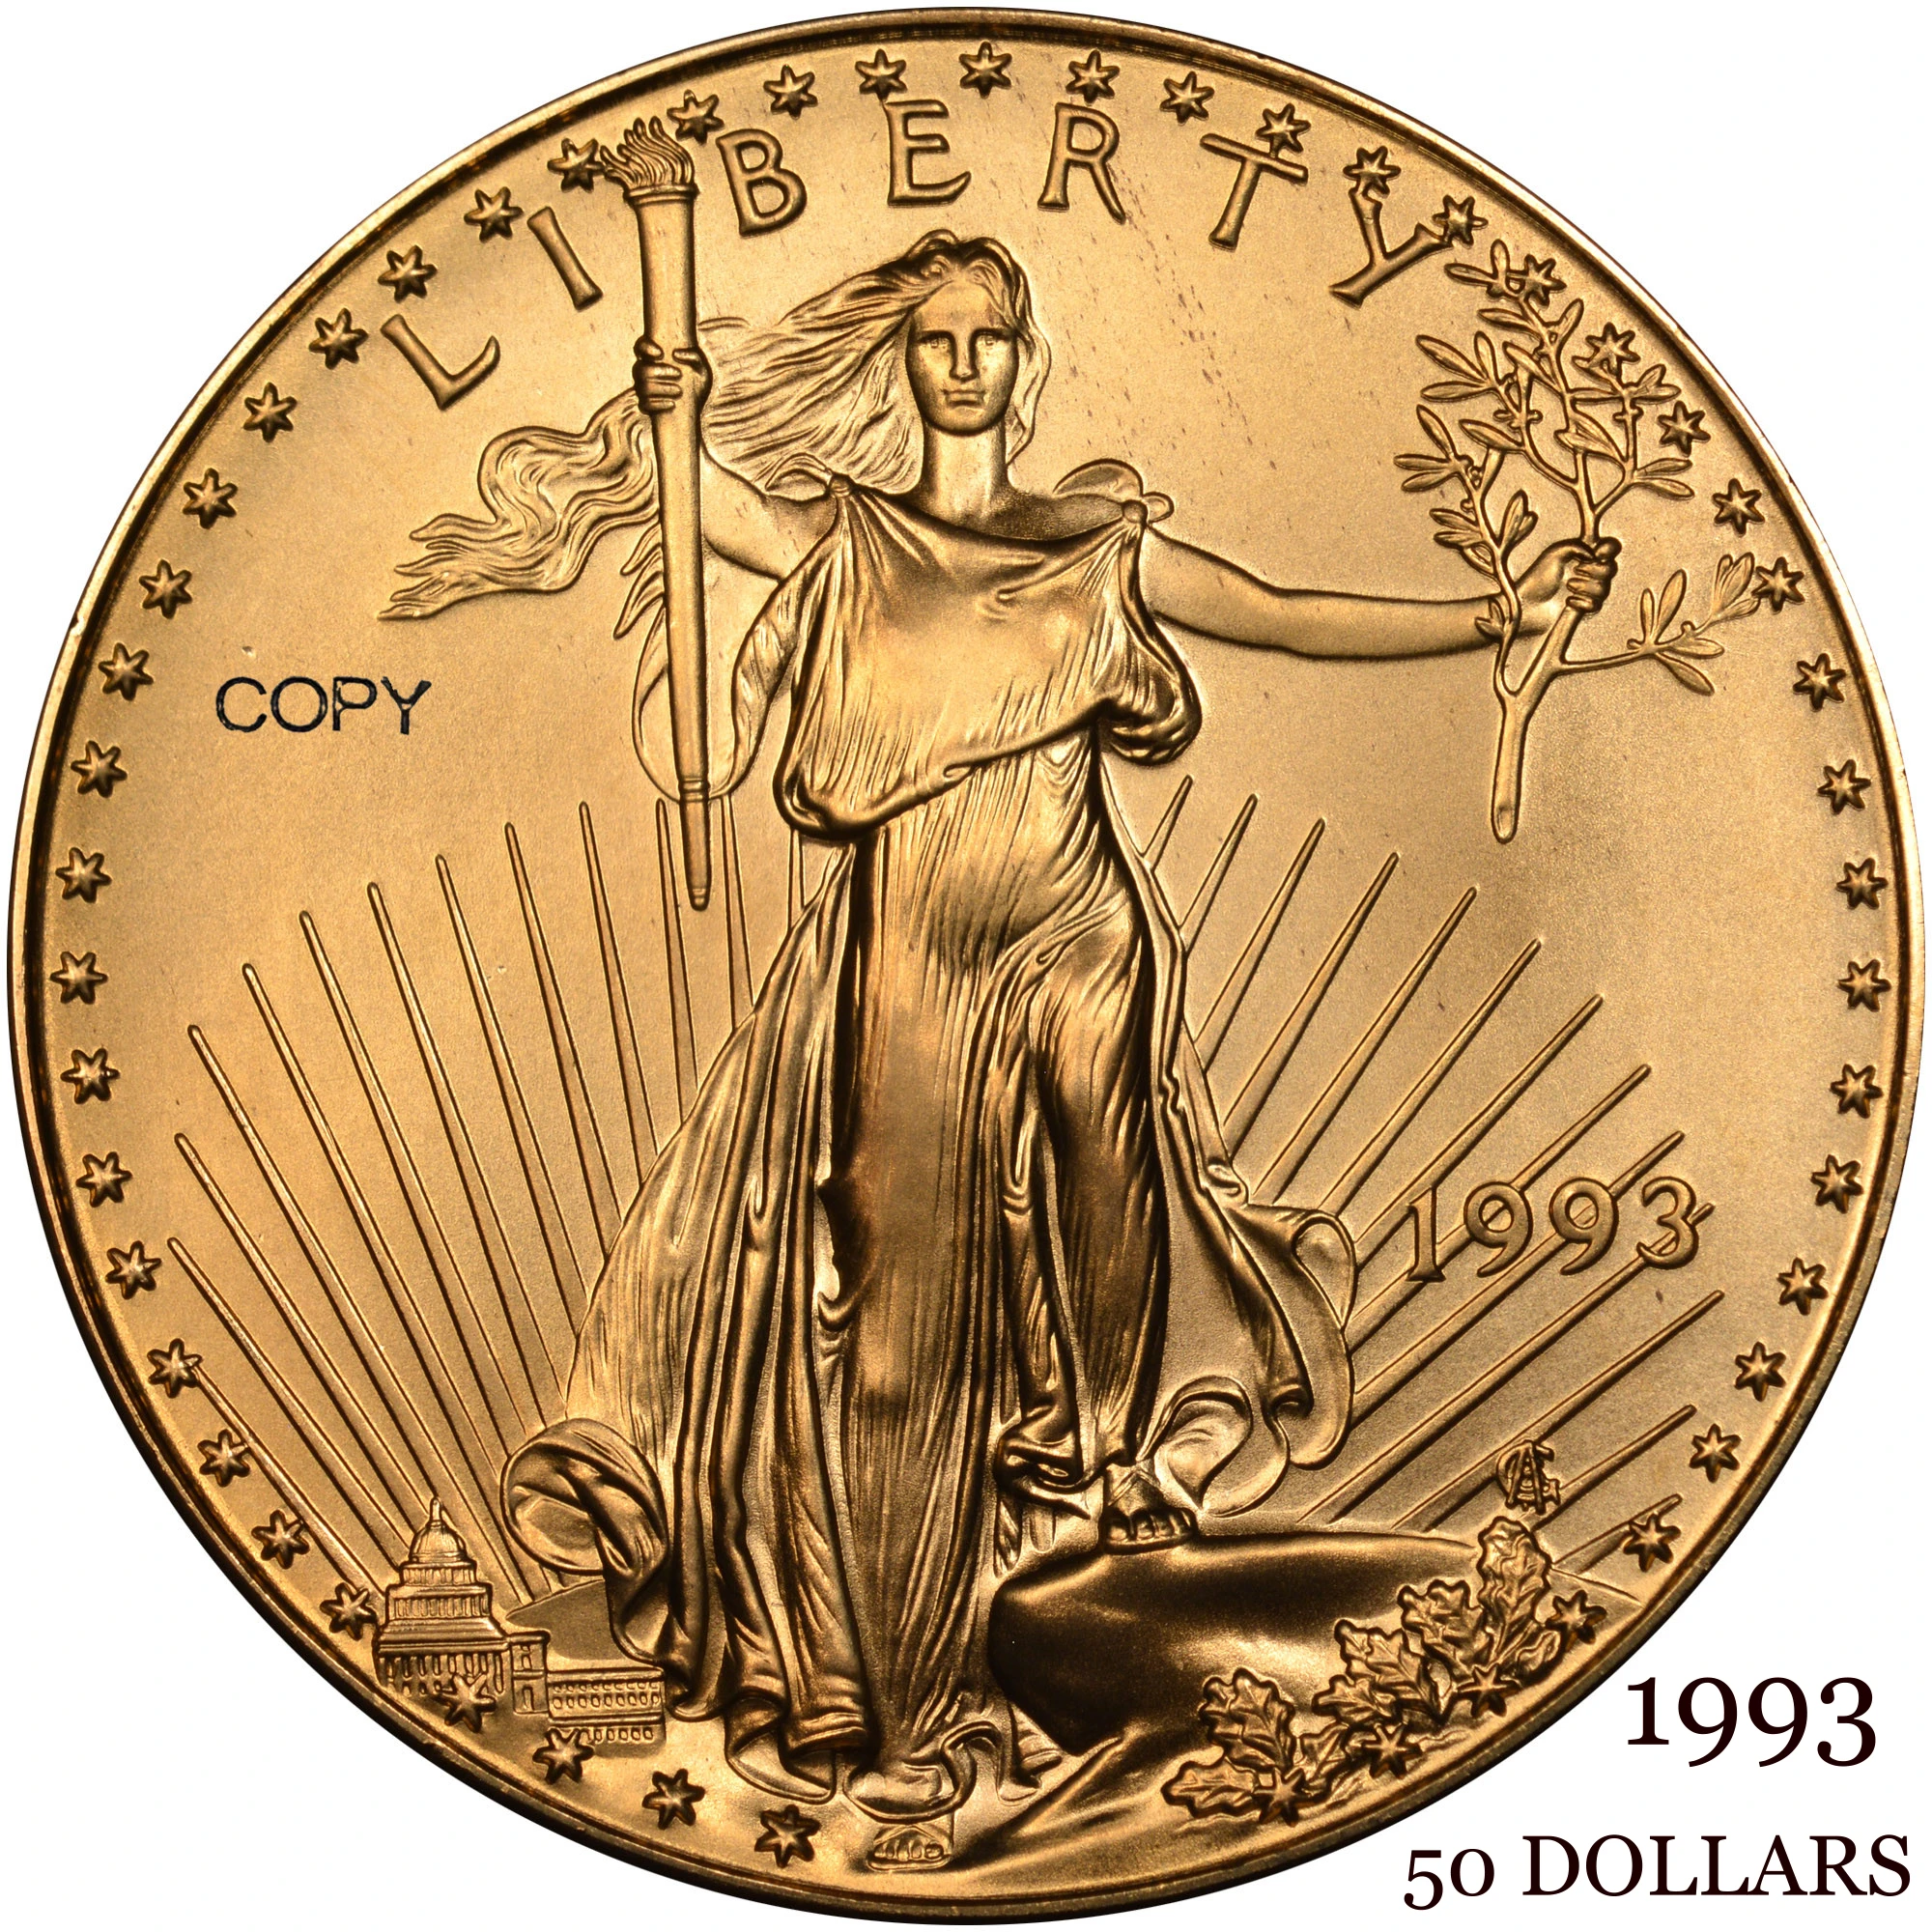 United States US 1993 $50 50 Dollars One Ounce American Fine Gold Eagle Bullion Coinage USA Liberty Brass Metal Copy Coin